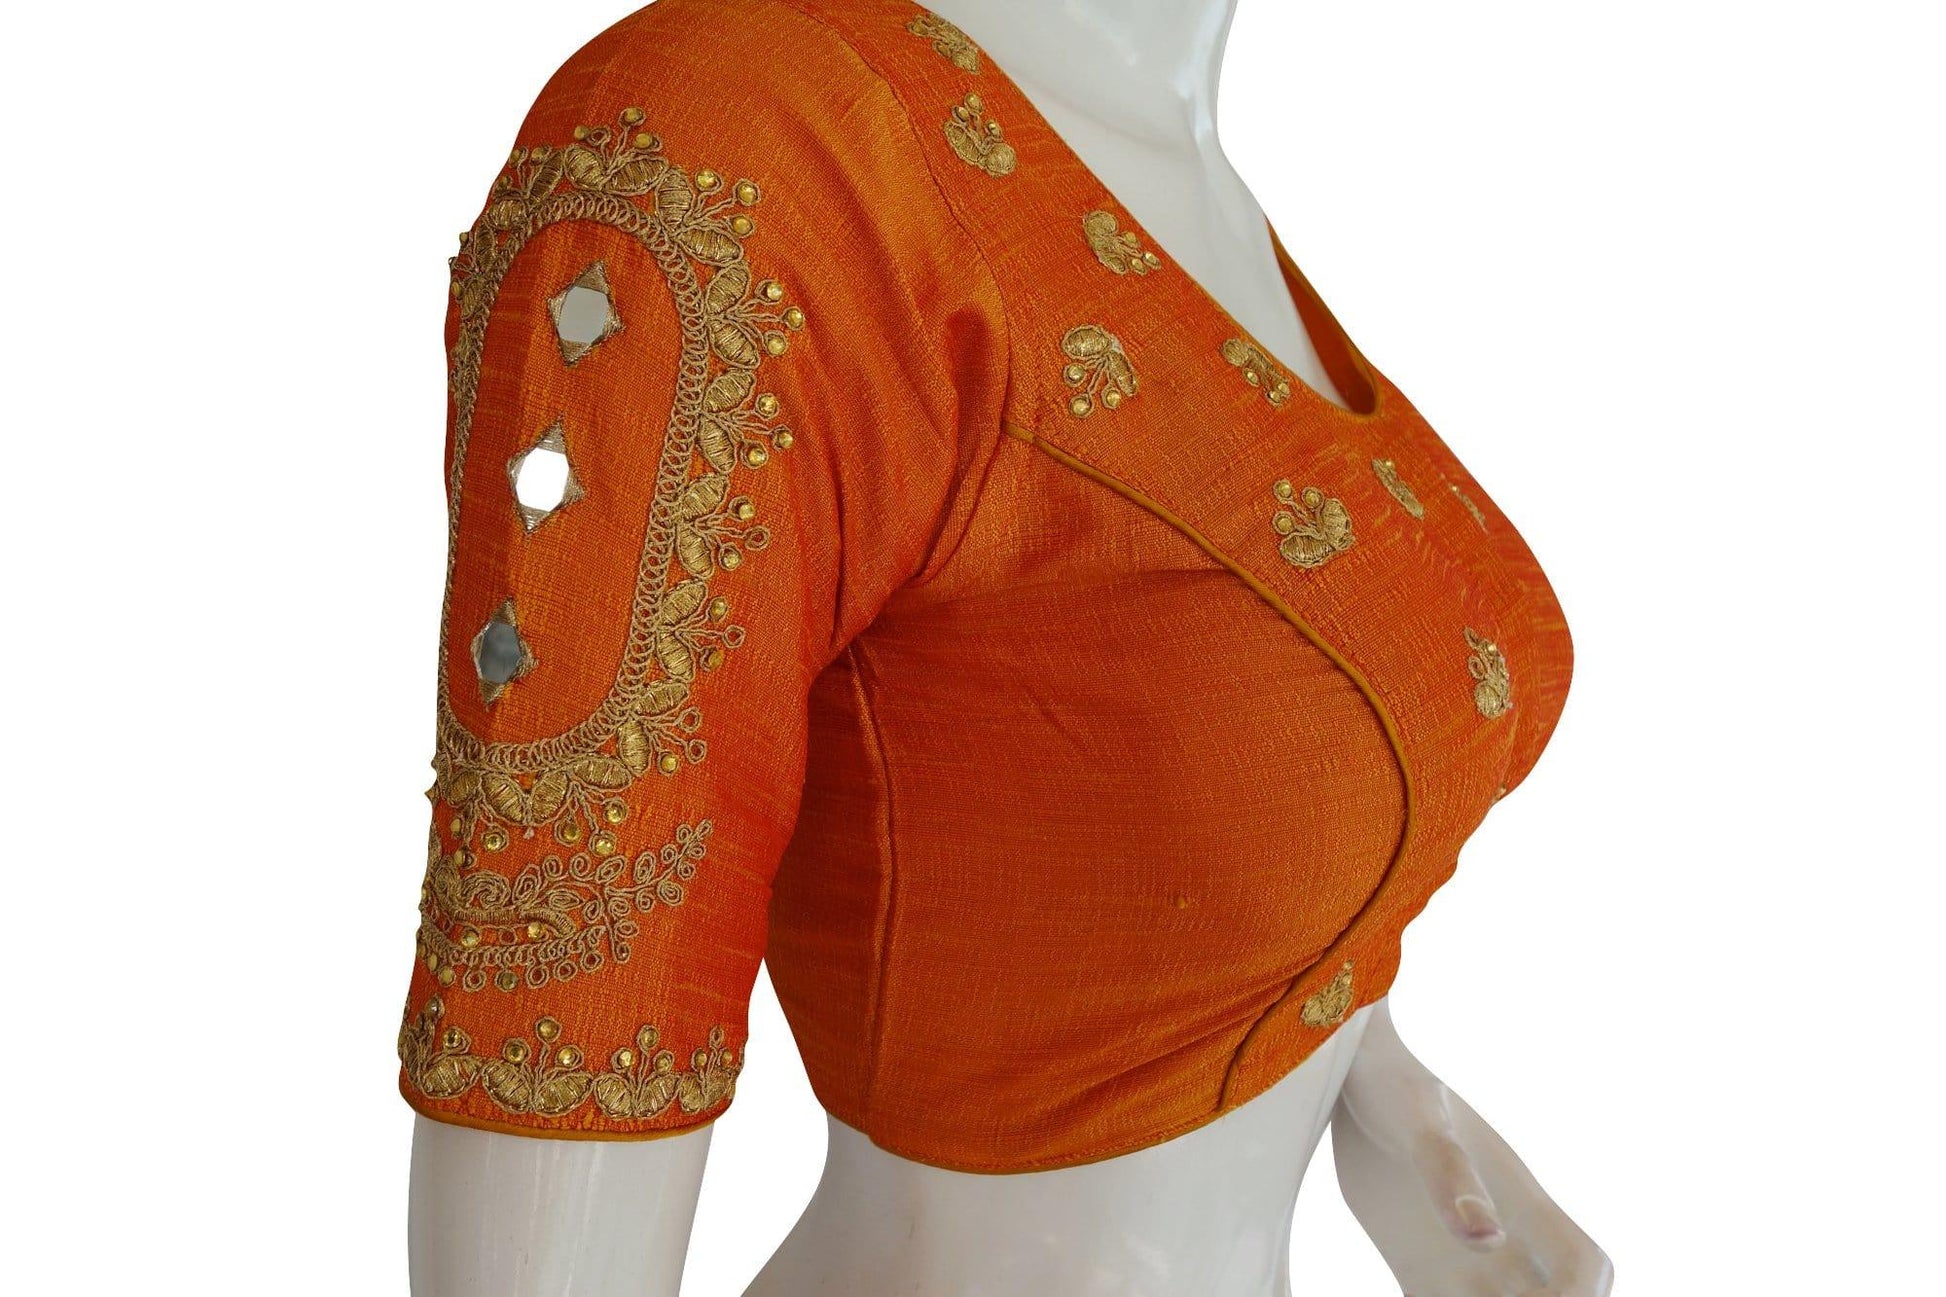 yellow color high neck designer embroidered readymade blouse with mirror indian ready made blouse crop top